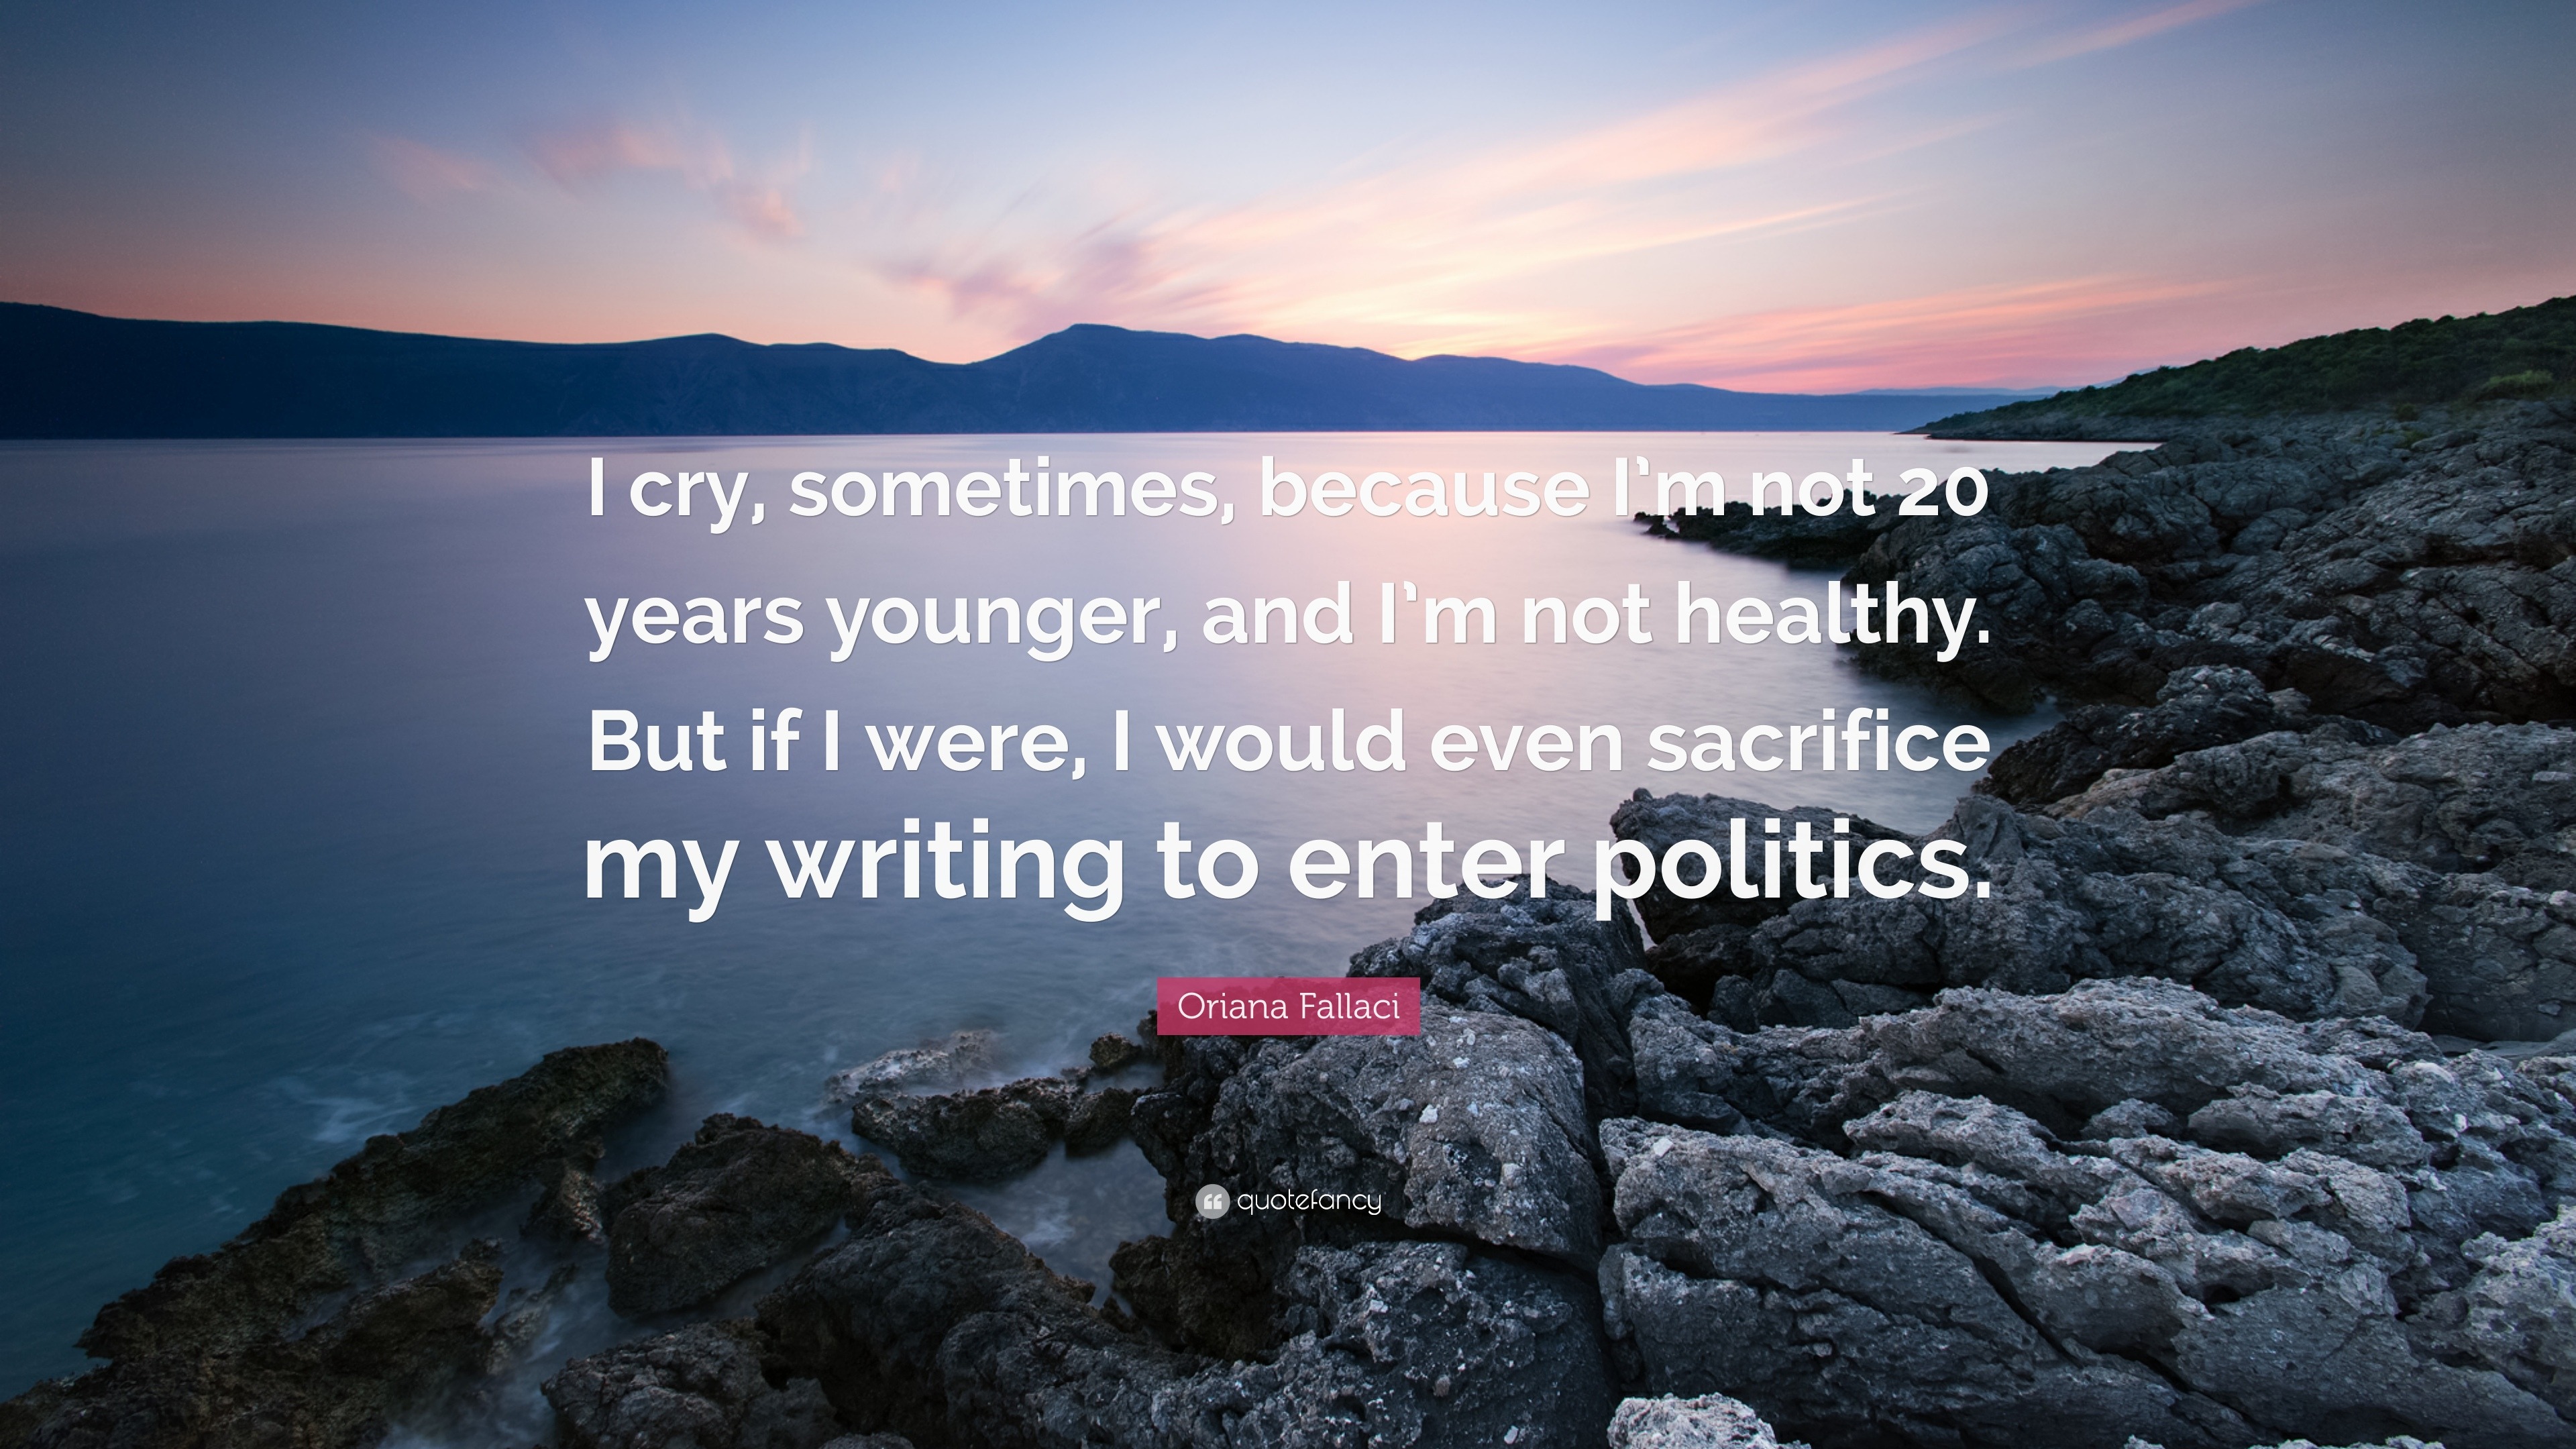 https://quotefancy.com/media/wallpaper/3840x2160/1918856-Oriana-Fallaci-Quote-I-cry-sometimes-because-I-m-not-20-years.jpg